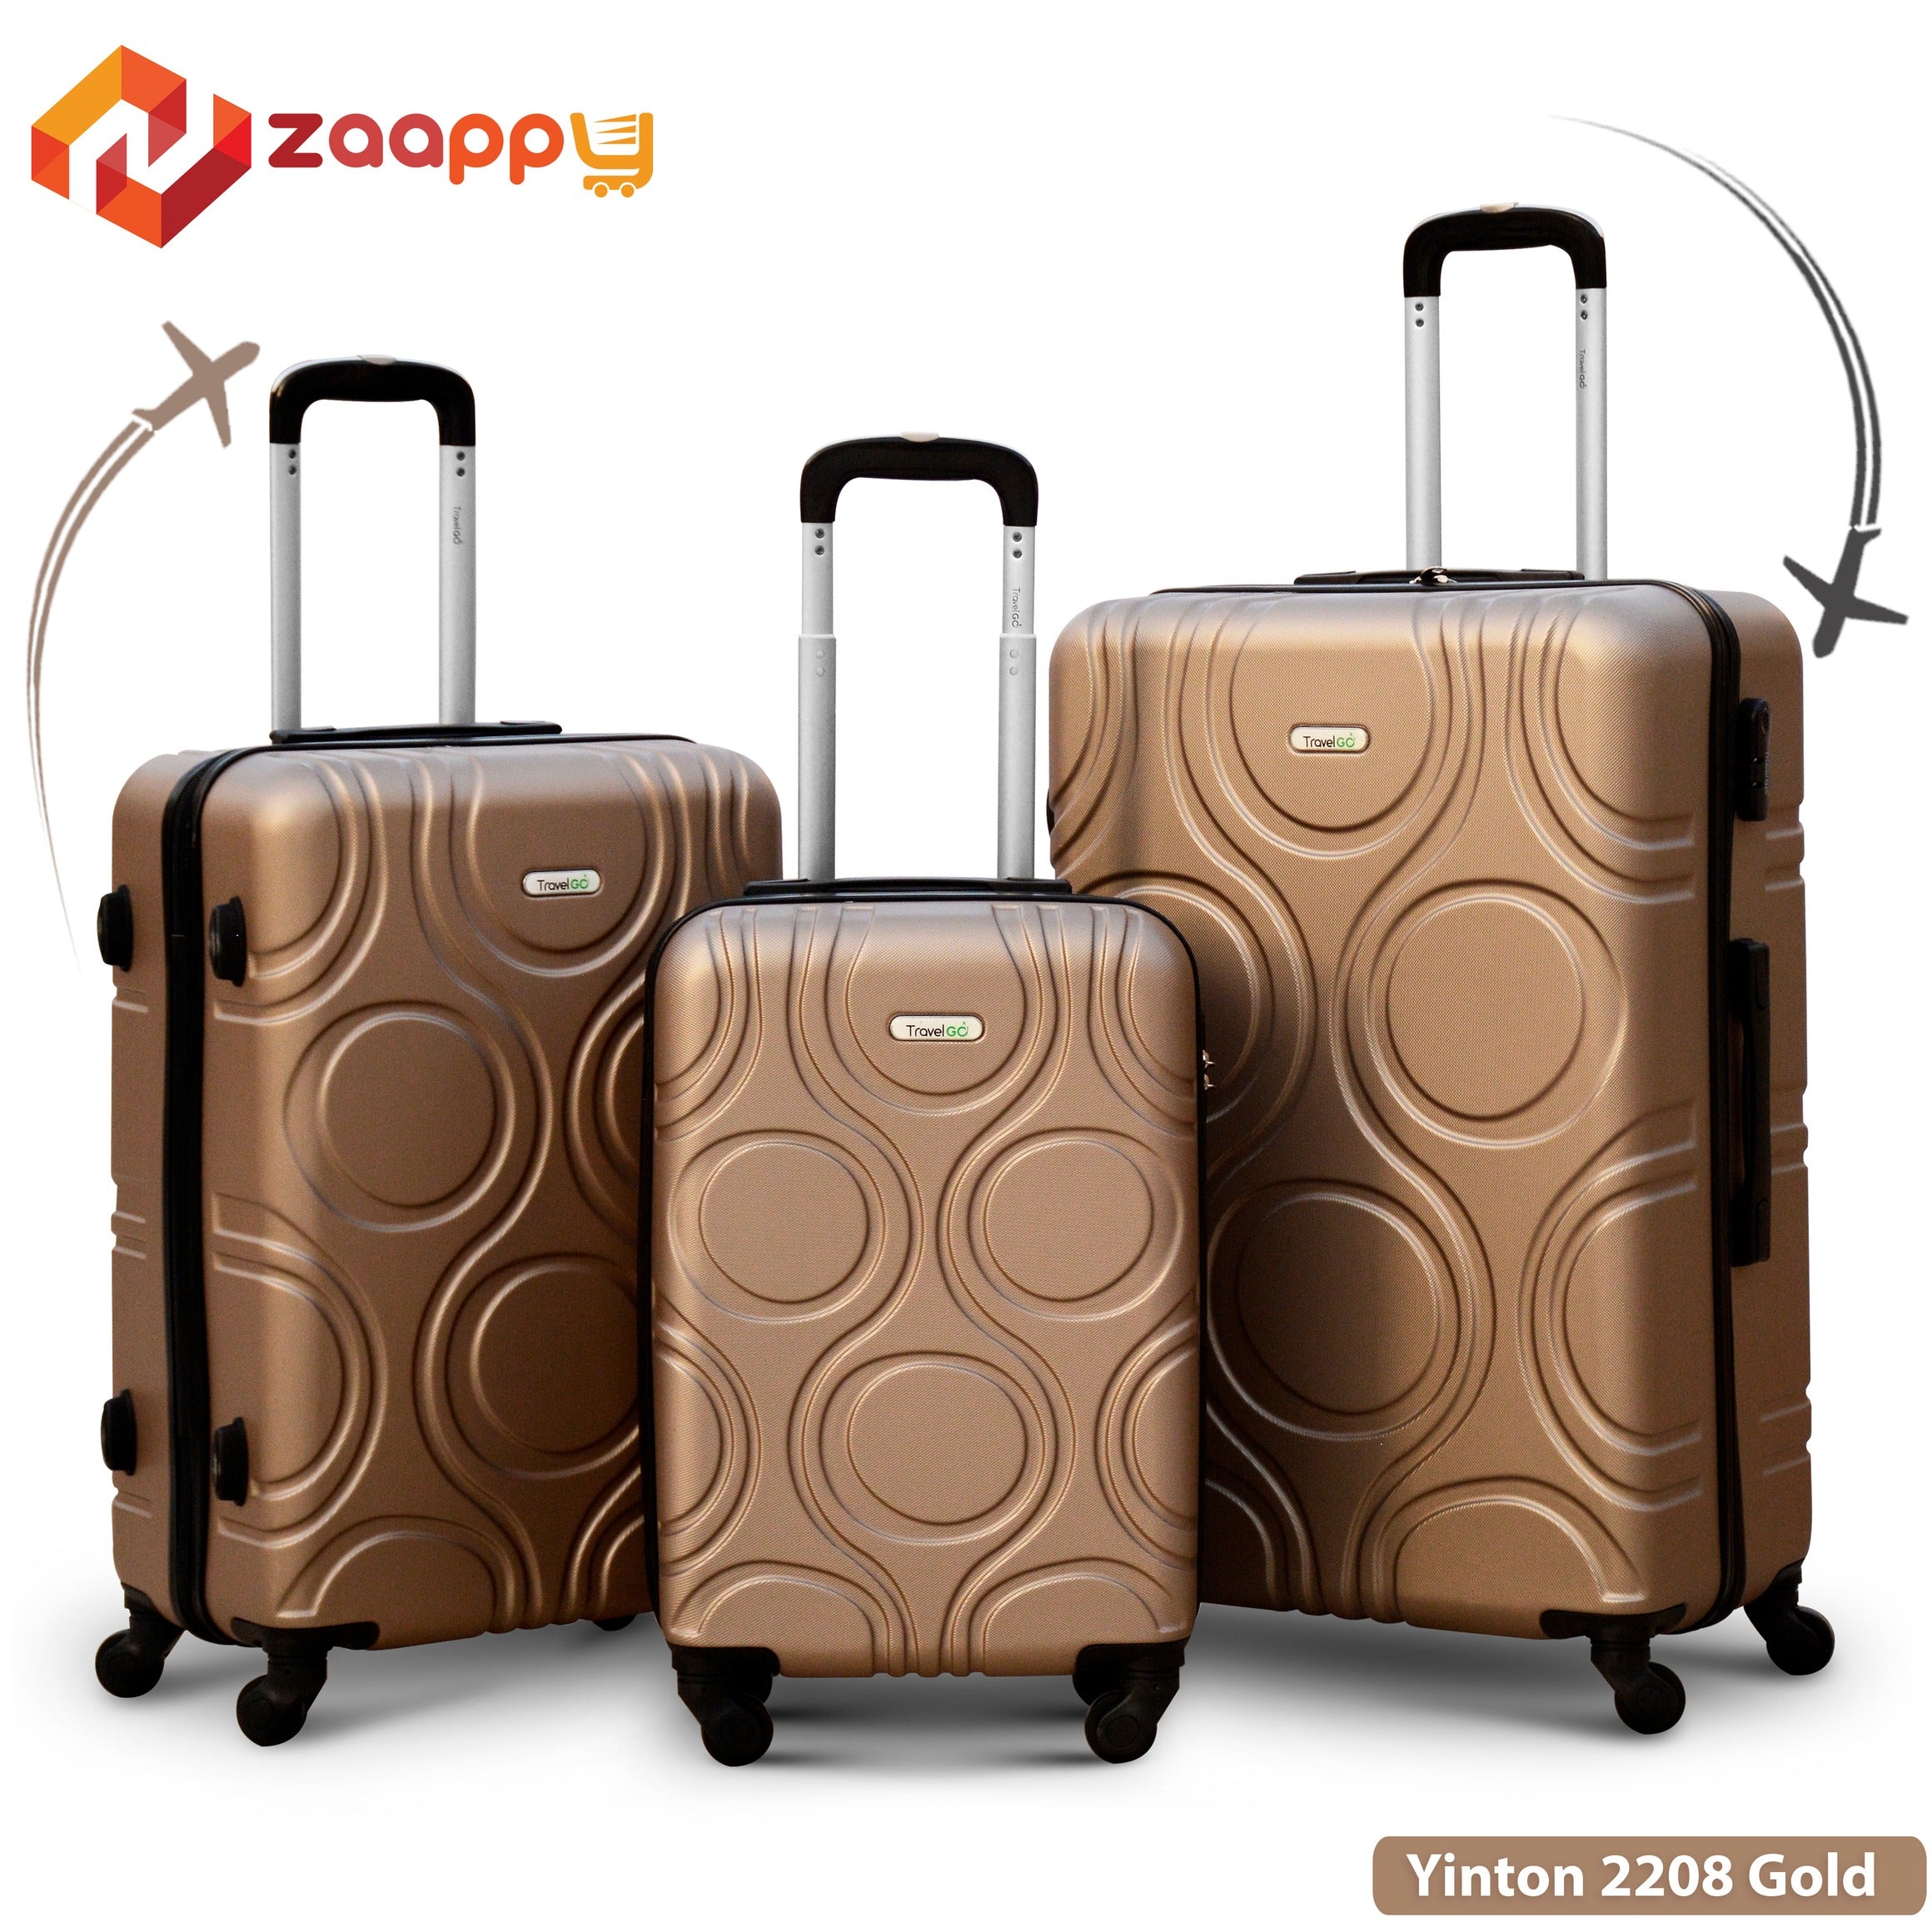 20” Inches Lightweight ABS Luggage | Hard Case Trolley Bag | 2 Years Warranty | Yinton 2208 Gold